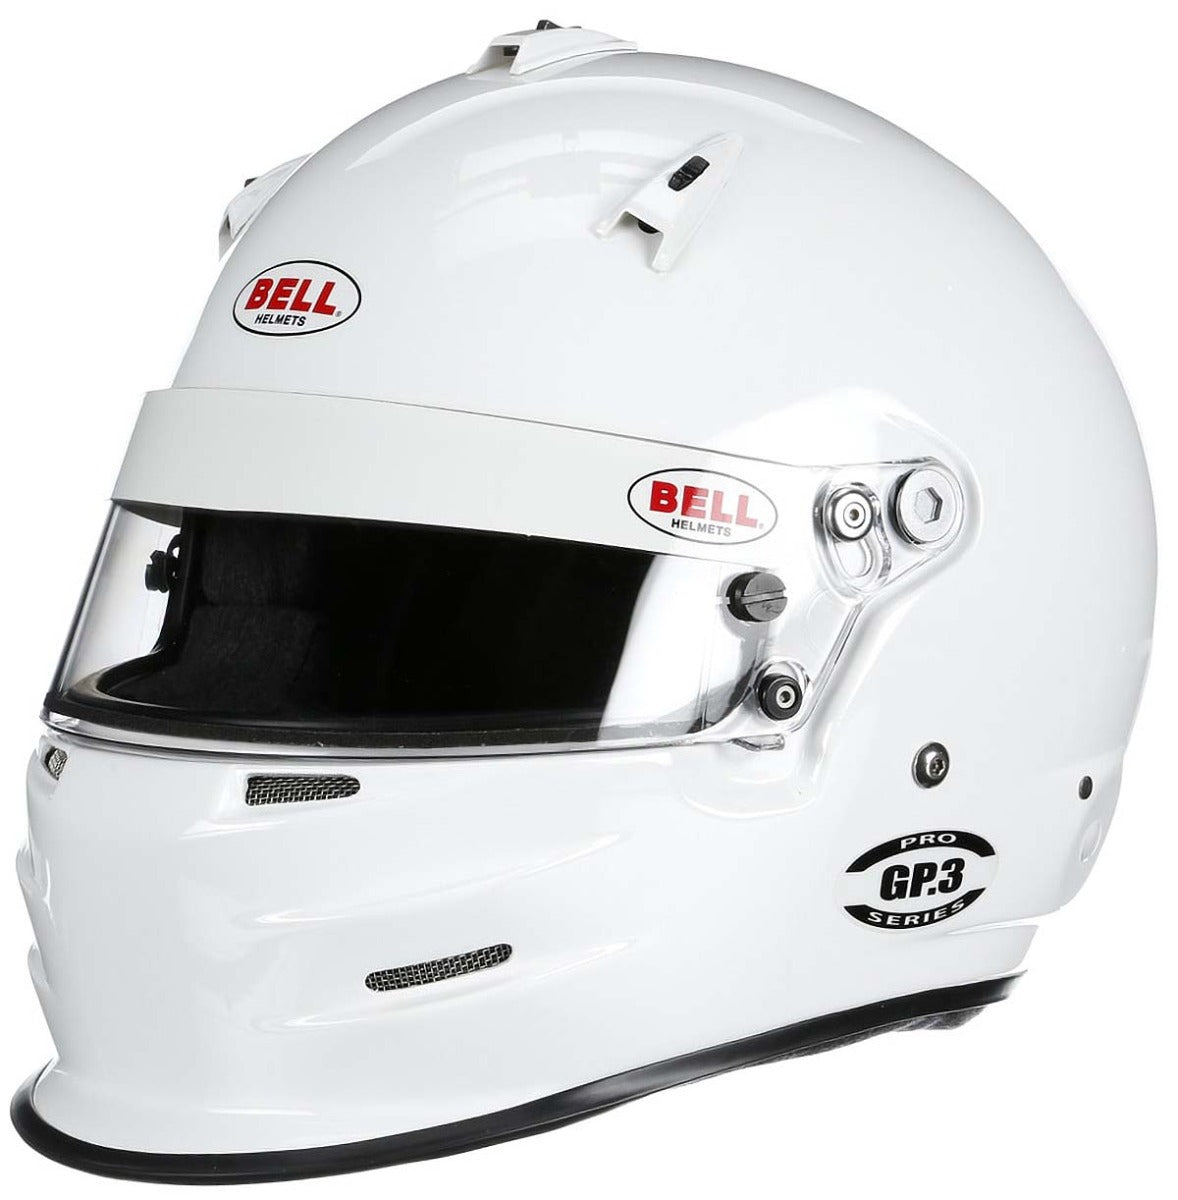 Bell GP3 Sport Helmet White SA2020 Front View Image